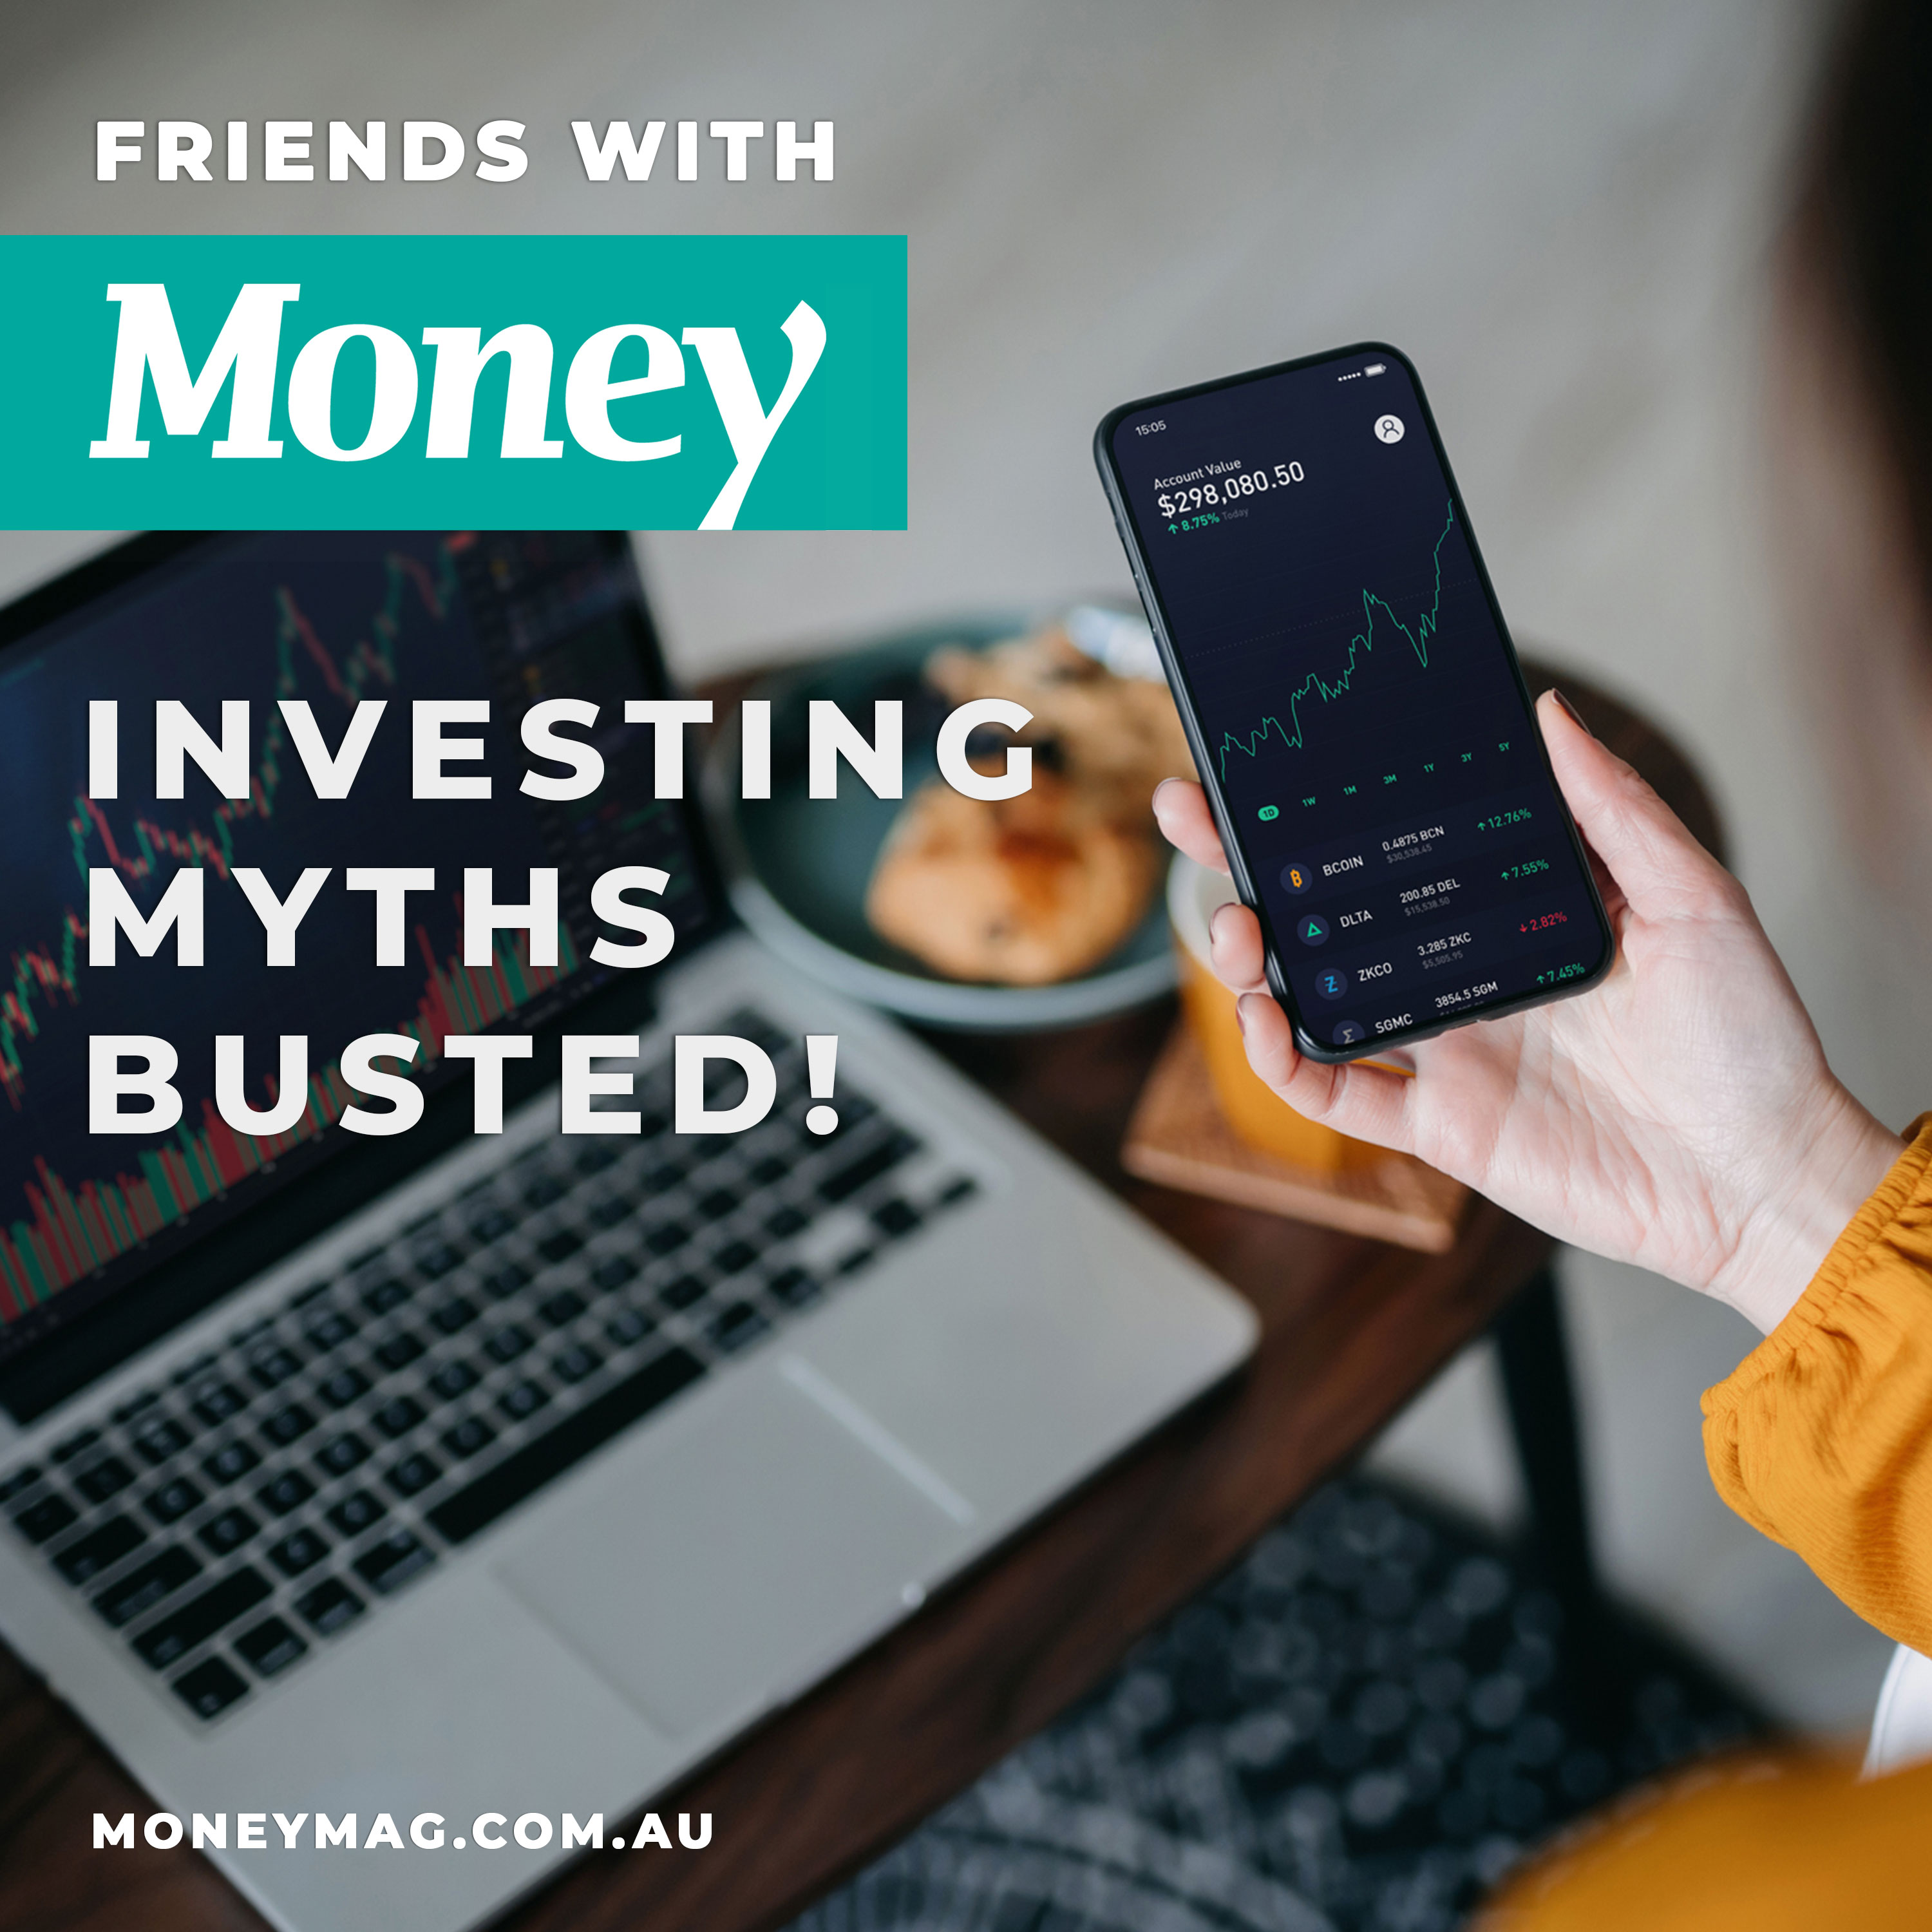 Investing myths busted!